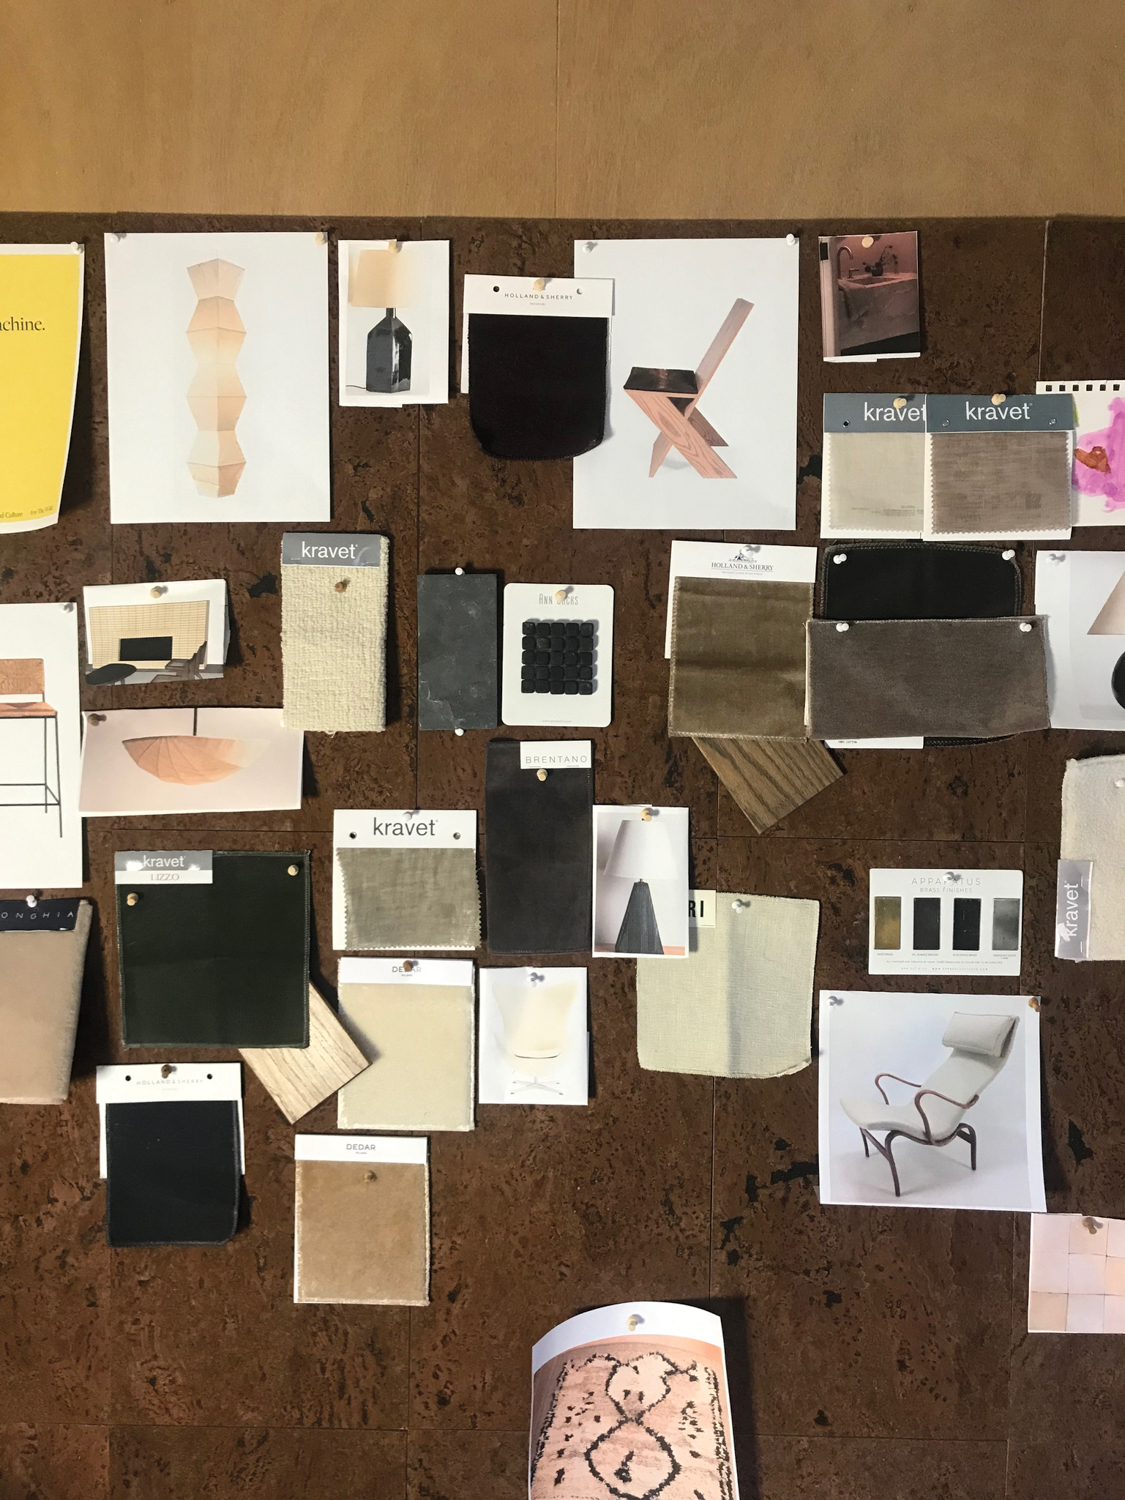 a collage of fabric samples and interior design drawings